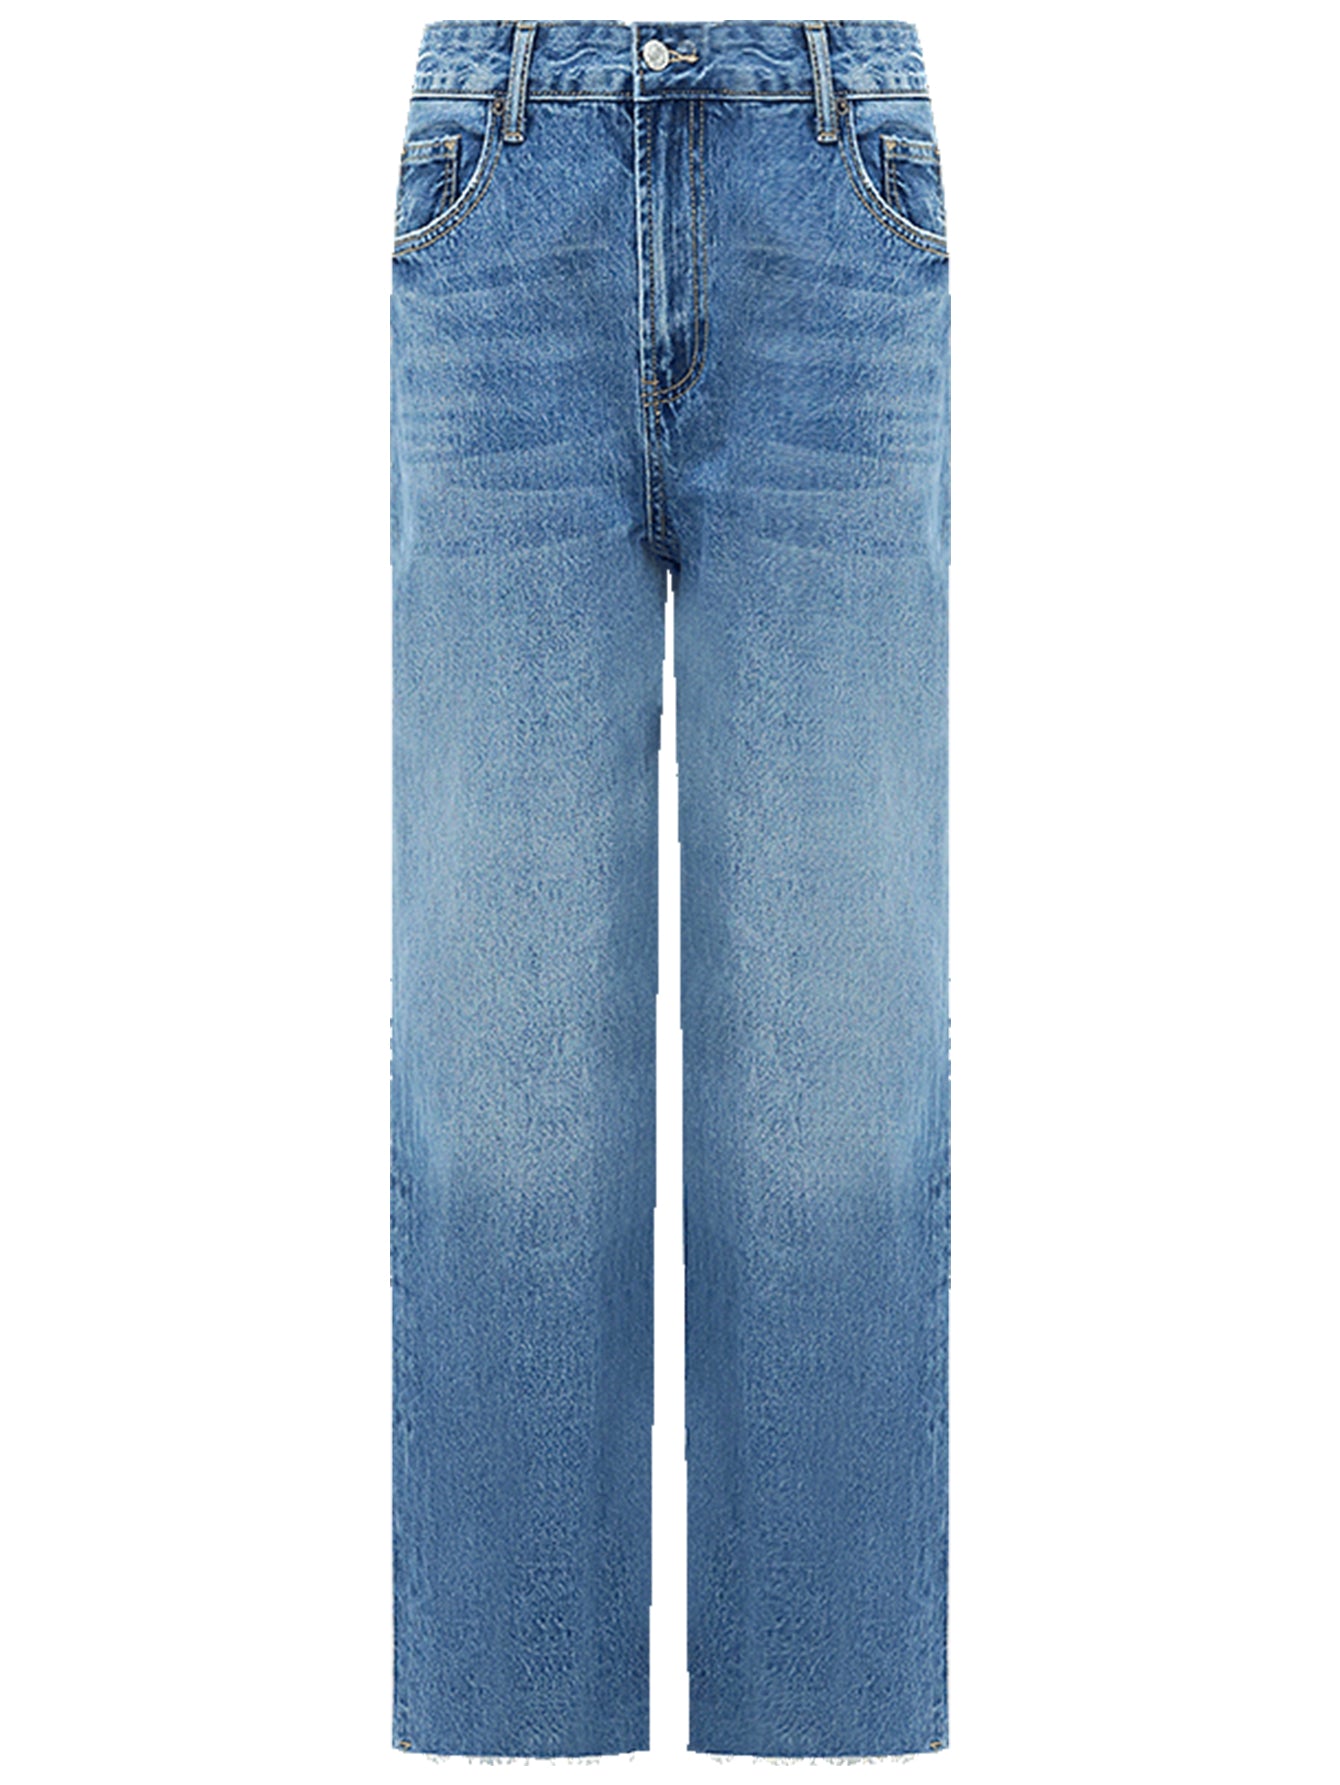 stone-washed-straight-leg-blue-jeans_all_blue_4.jpg